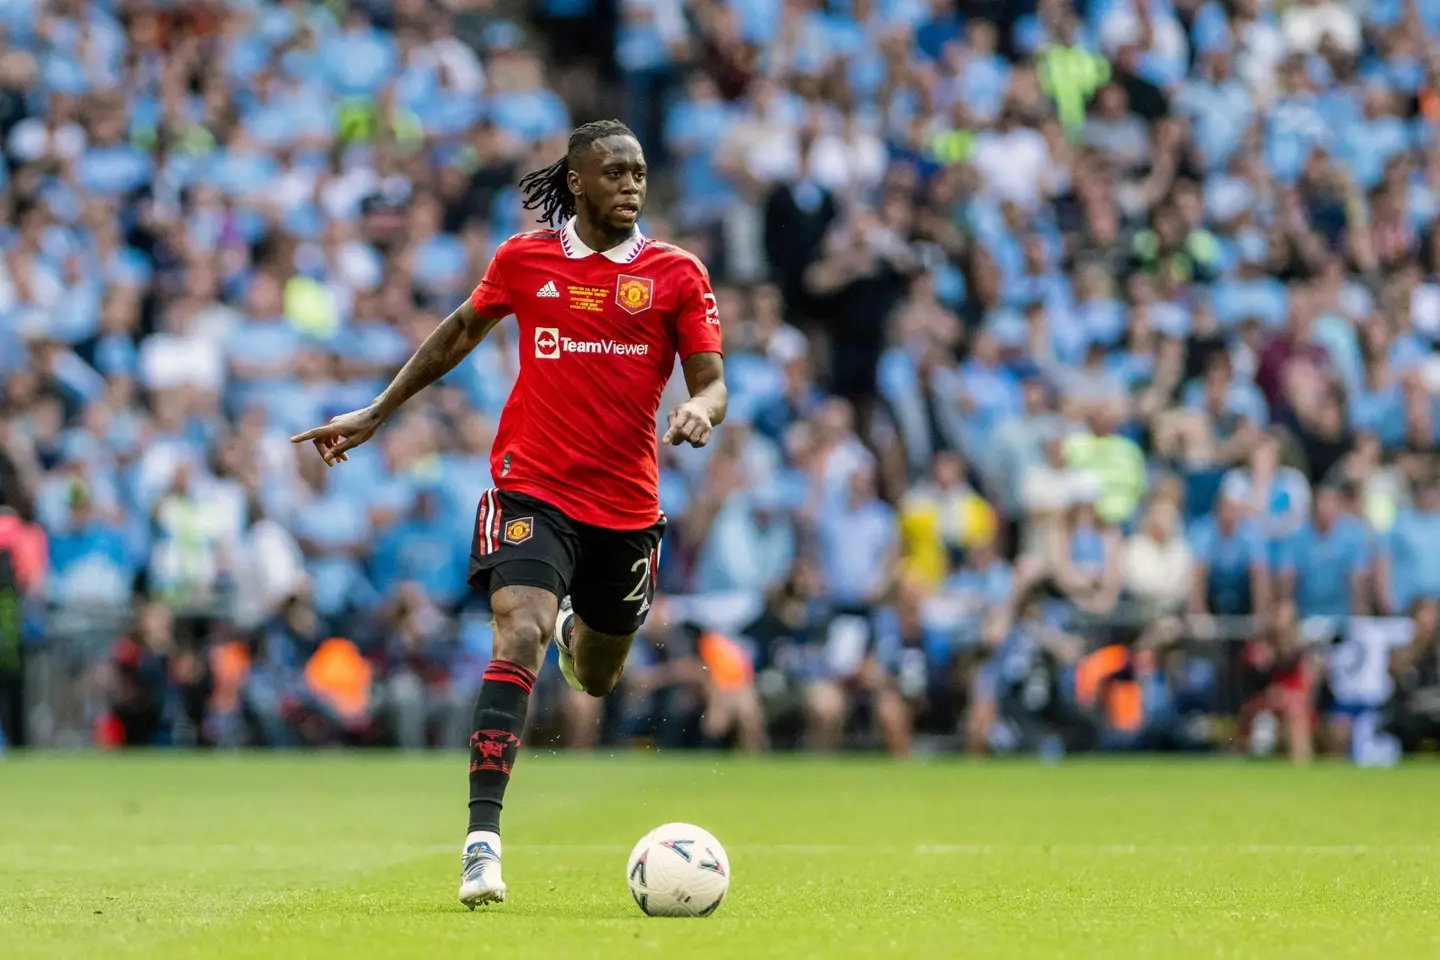 Wan-Bissaka is a tough man to dribble past. Image: Alamy